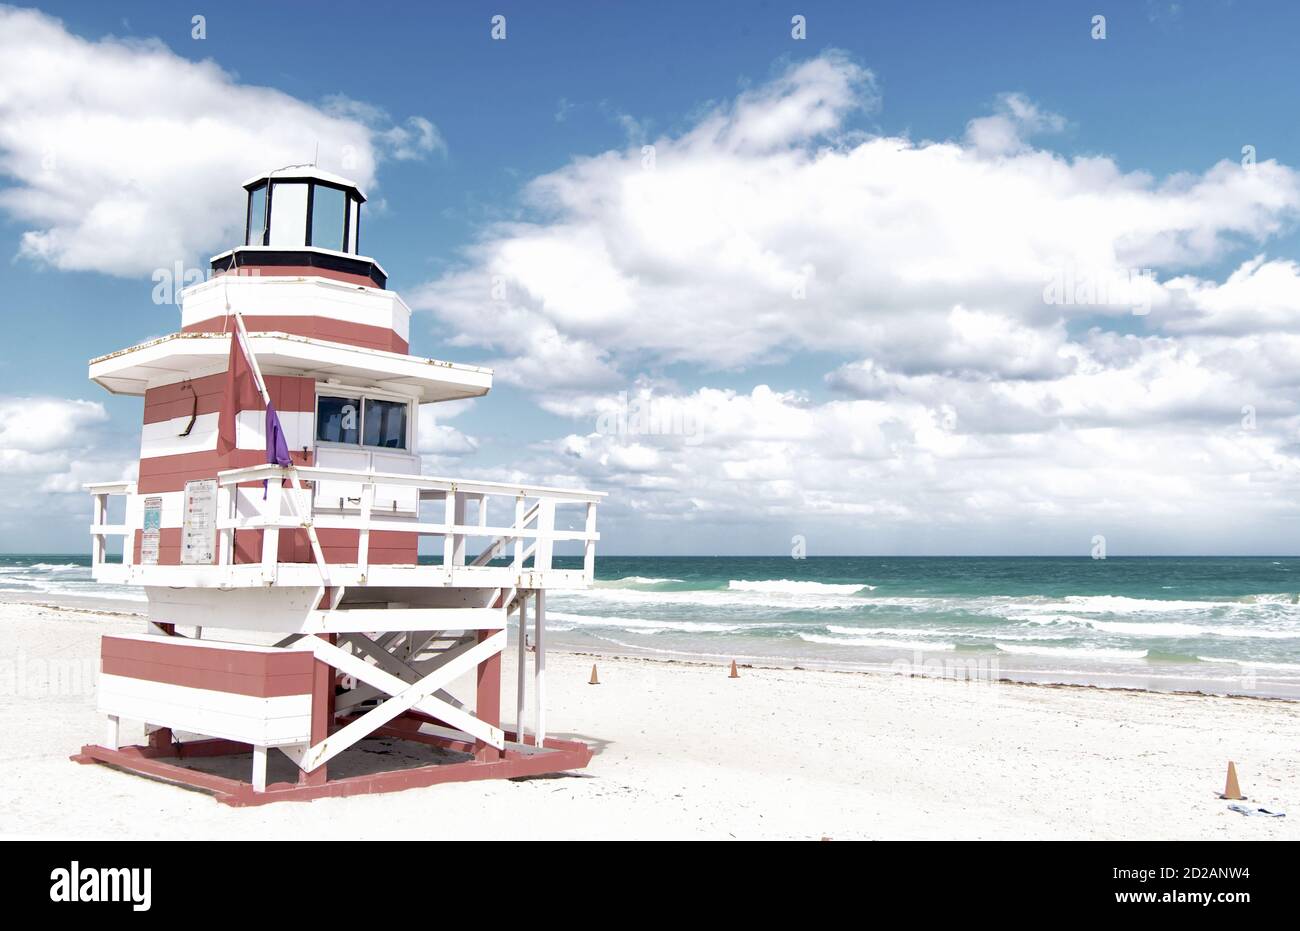 Miami, South Beach, Florida, lifeguard house in a typical colorful Art Deco style on cloudy day with blue sky and Atlantic Ocean in background, world famous travel location Stock Photo